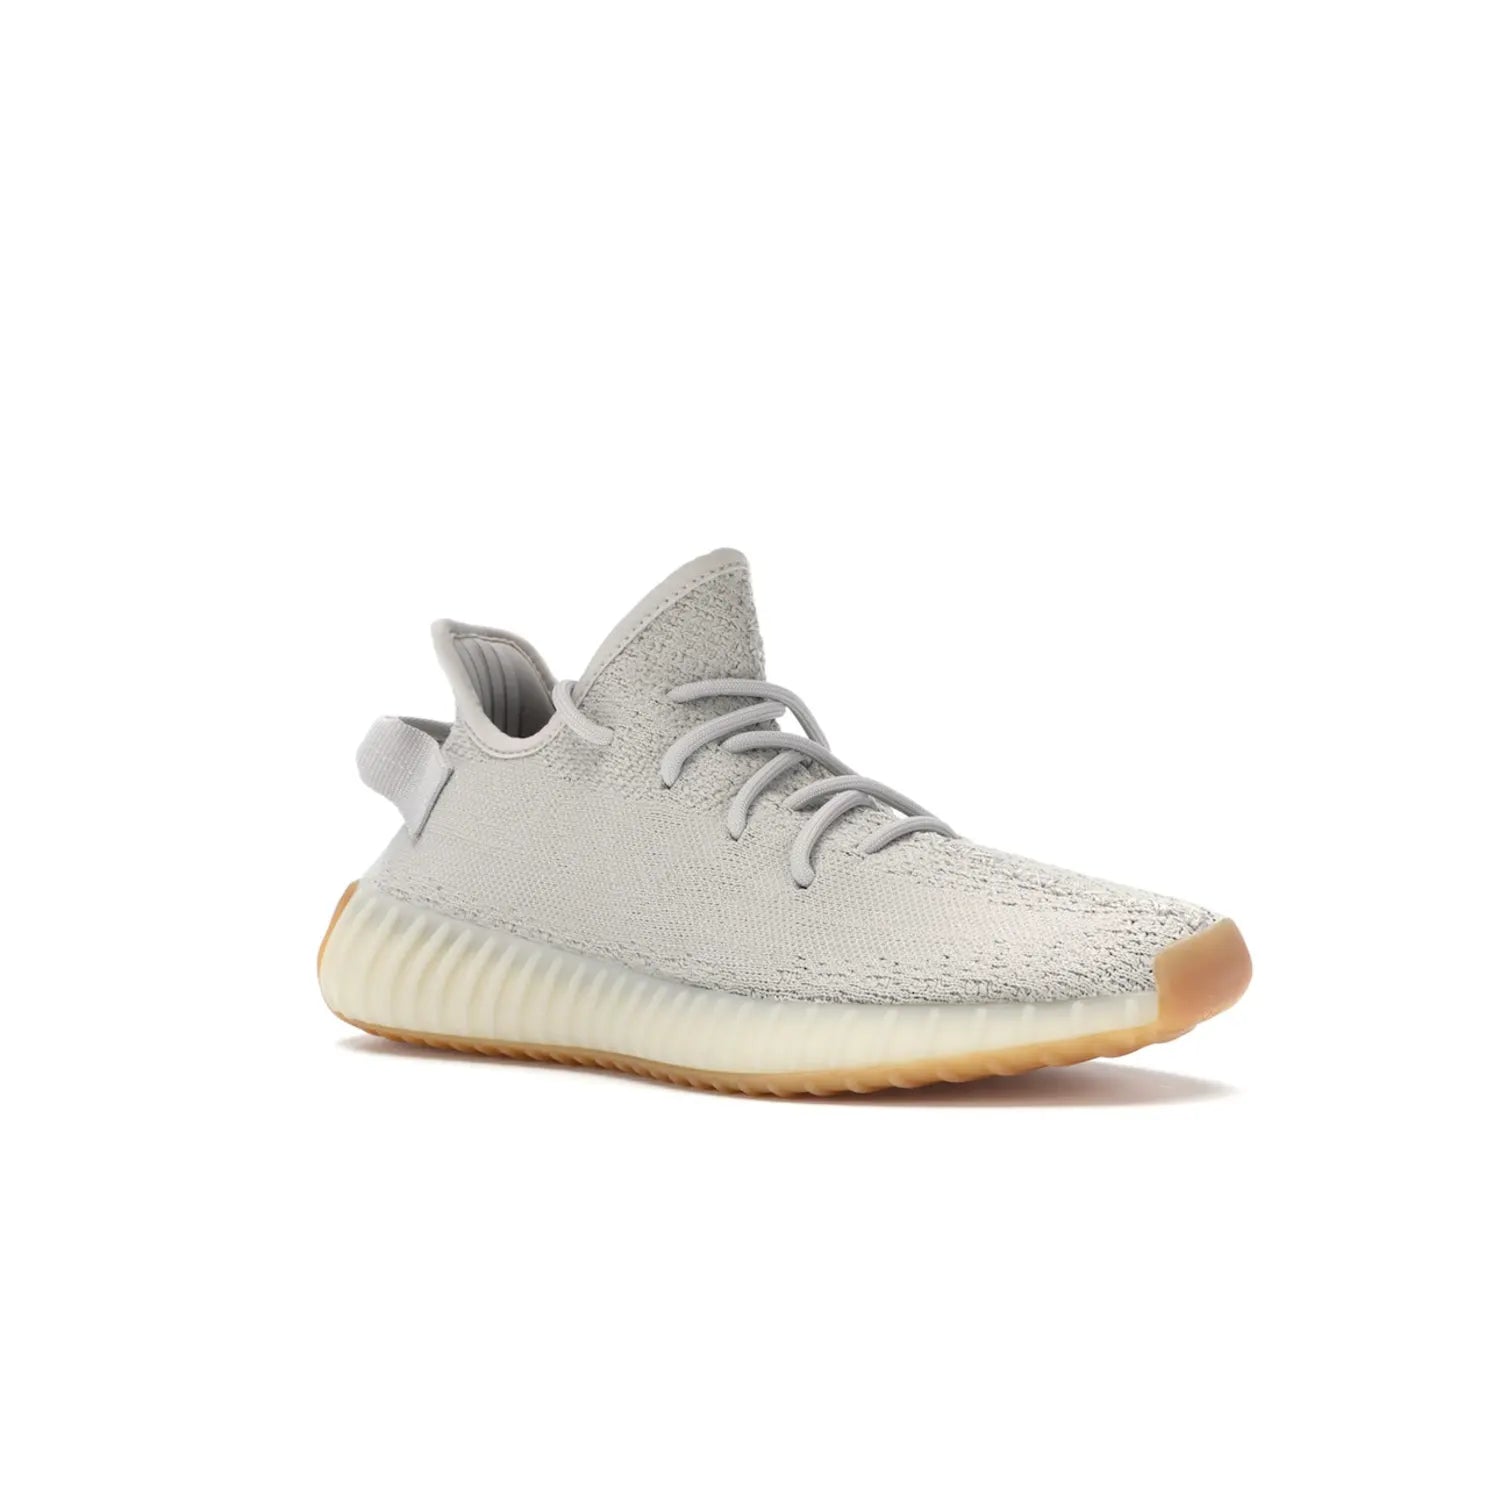 adidas Yeezy Boost 350 V2 Sesame - Image 5 - Only at www.BallersClubKickz.com - Introducing the adidas Yeezy Boost 350 V2 Sesame. Featuring a sesame upper, midsole and gum sole for a sleek silhouette. Cop the stylish sneaker released in November 2018.